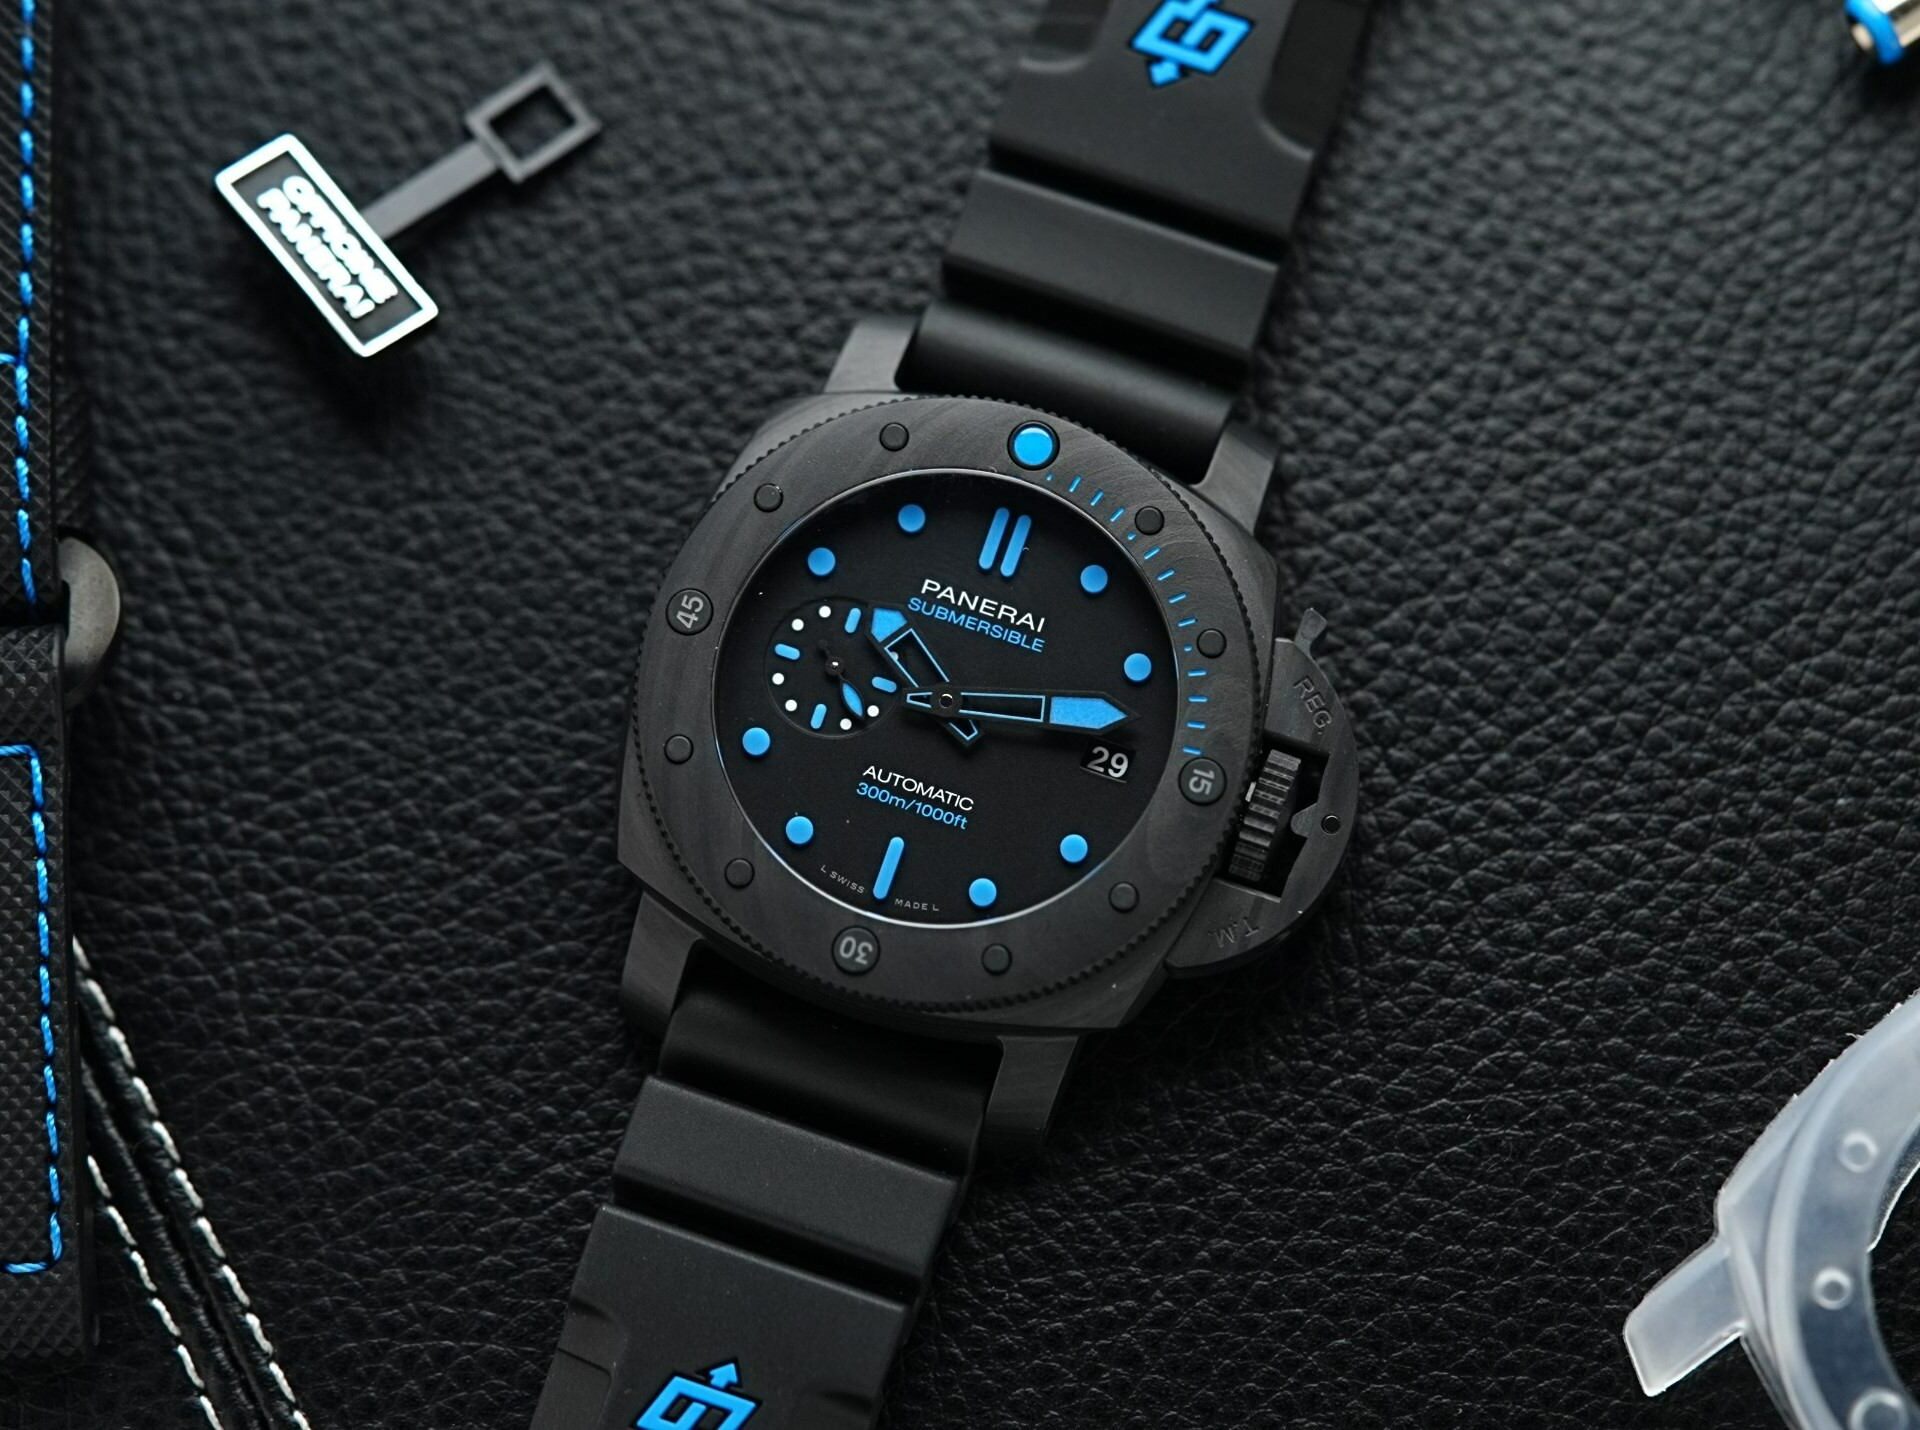 Panerai Submersible Carbotech PAM960 displayed with black background and props.